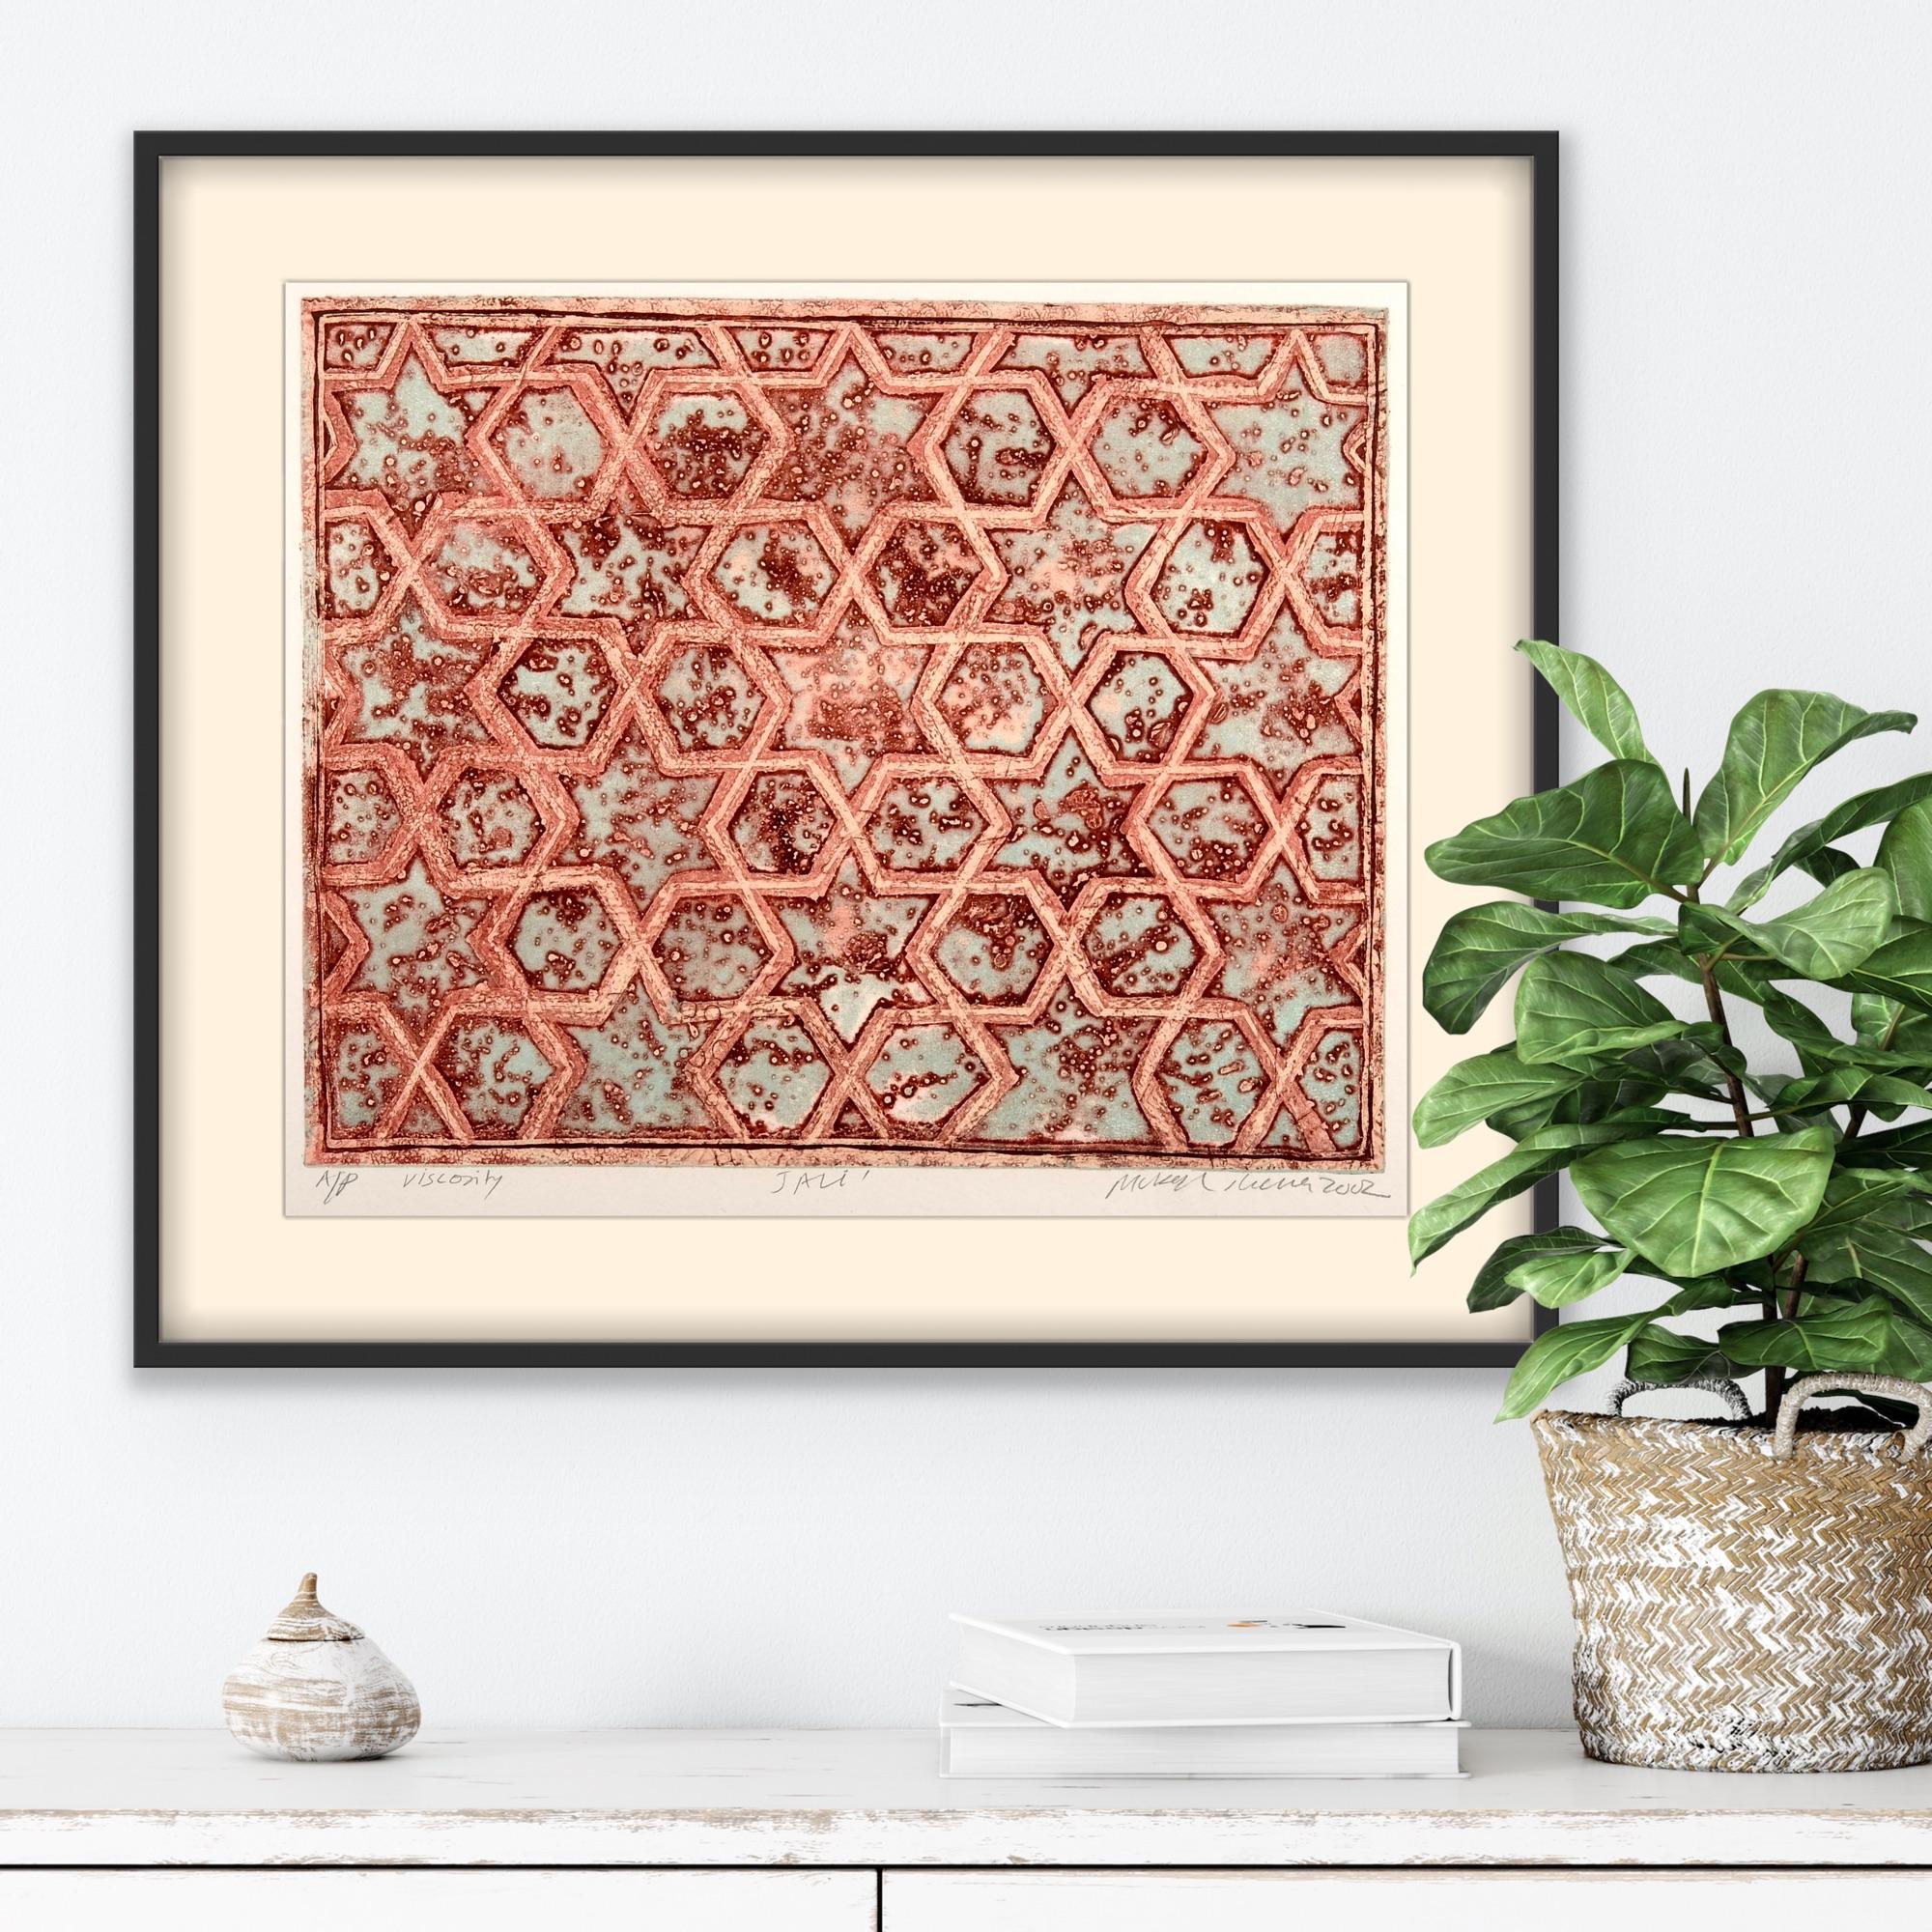 Abstract India Landscape Rajasthan Light Viscosity Print Natural Jali Earth Red For Sale 3